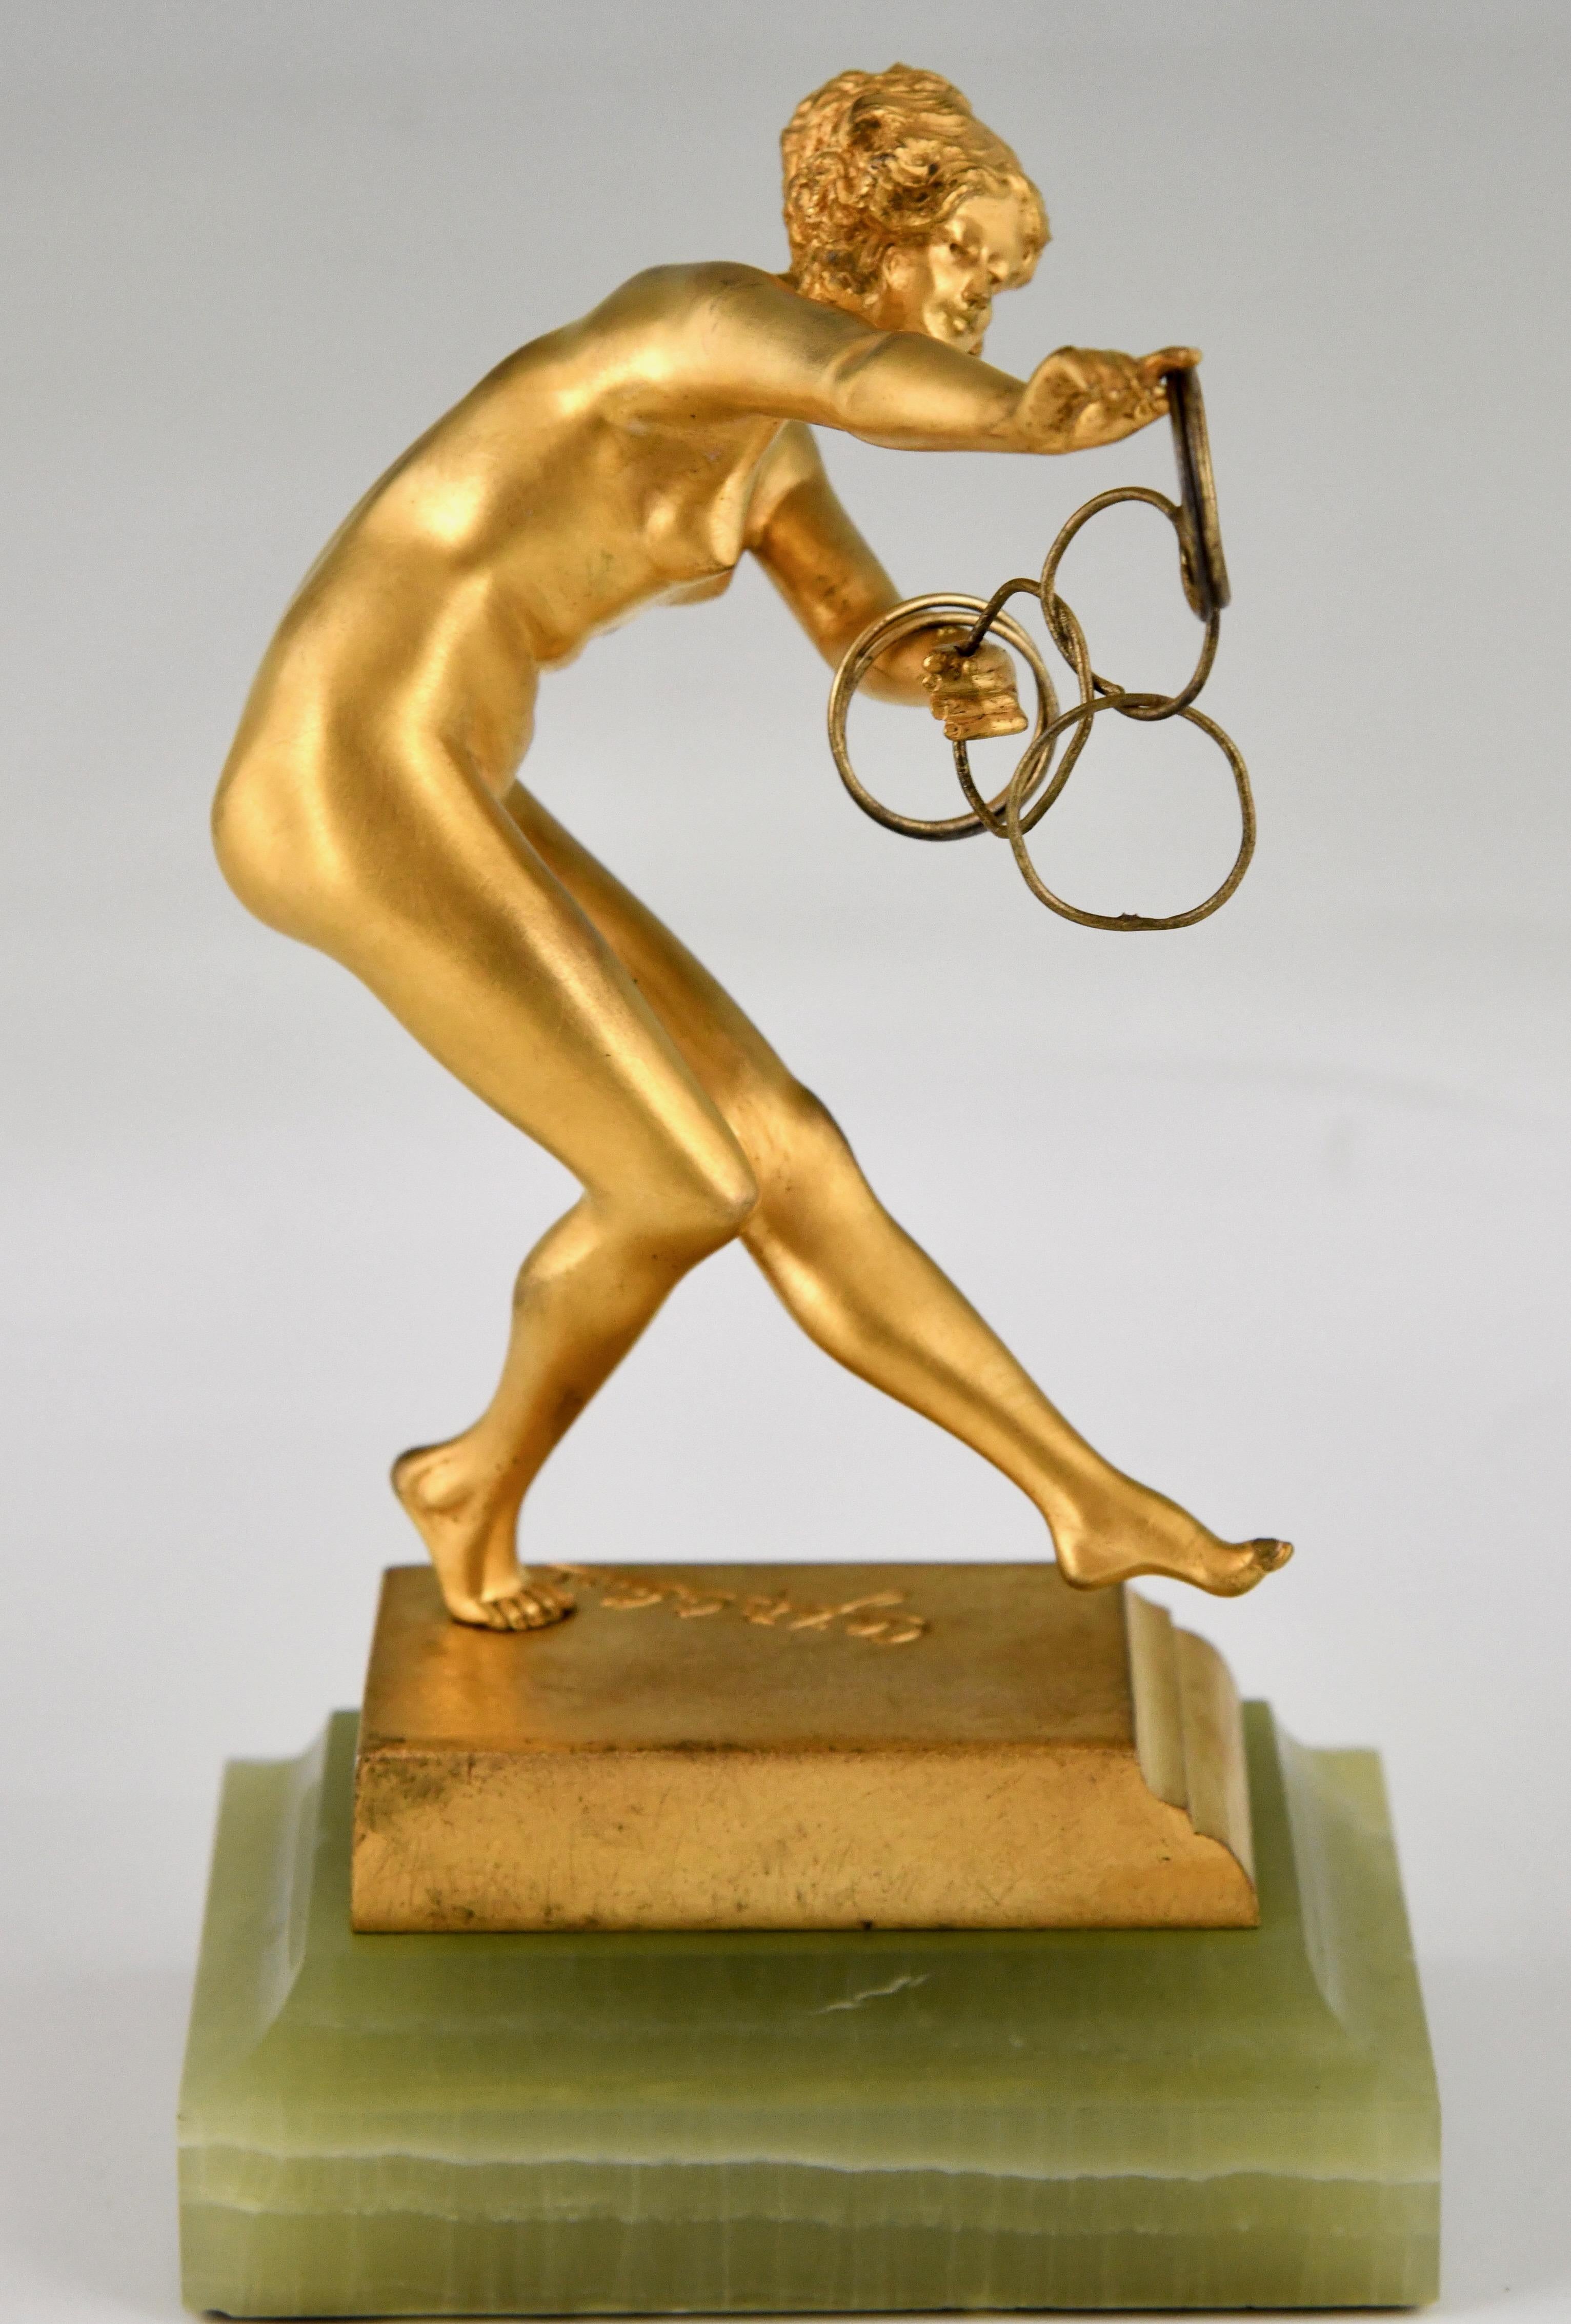 Art Deco bronze sculpture nude ring dancer by Claire Jeanne Roberte Colinet. 
Entitled The magic links.
Signed Cl. J. R. Colinet, with Foundry mark SPA. Numbered. 
Gilt bronze on onyx base. 
France 1925. 
This model is illustrated in:
Art Deco and